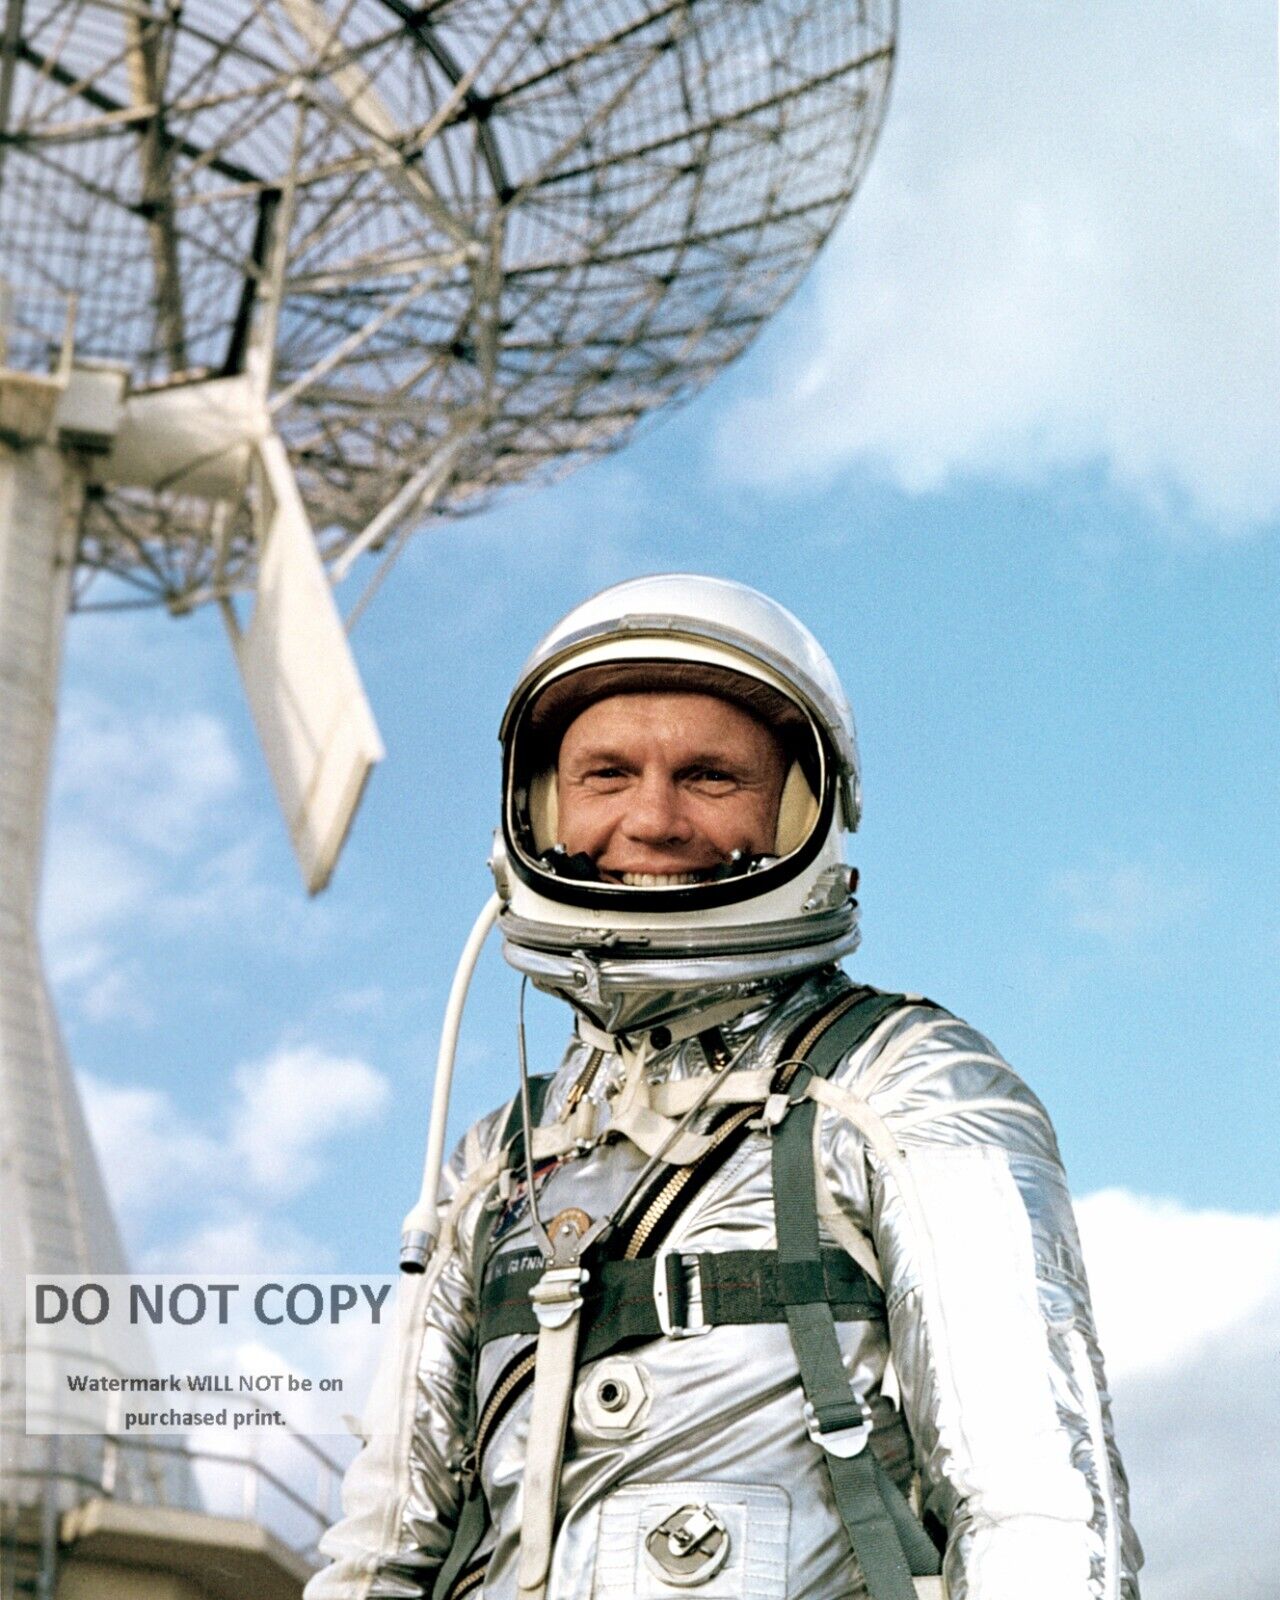 ASTRONAUT JOHN GLENN IN PRESSURE SUIT AT CAPE CANAVERAL 8X10 NASA PHOTO (AA-593)